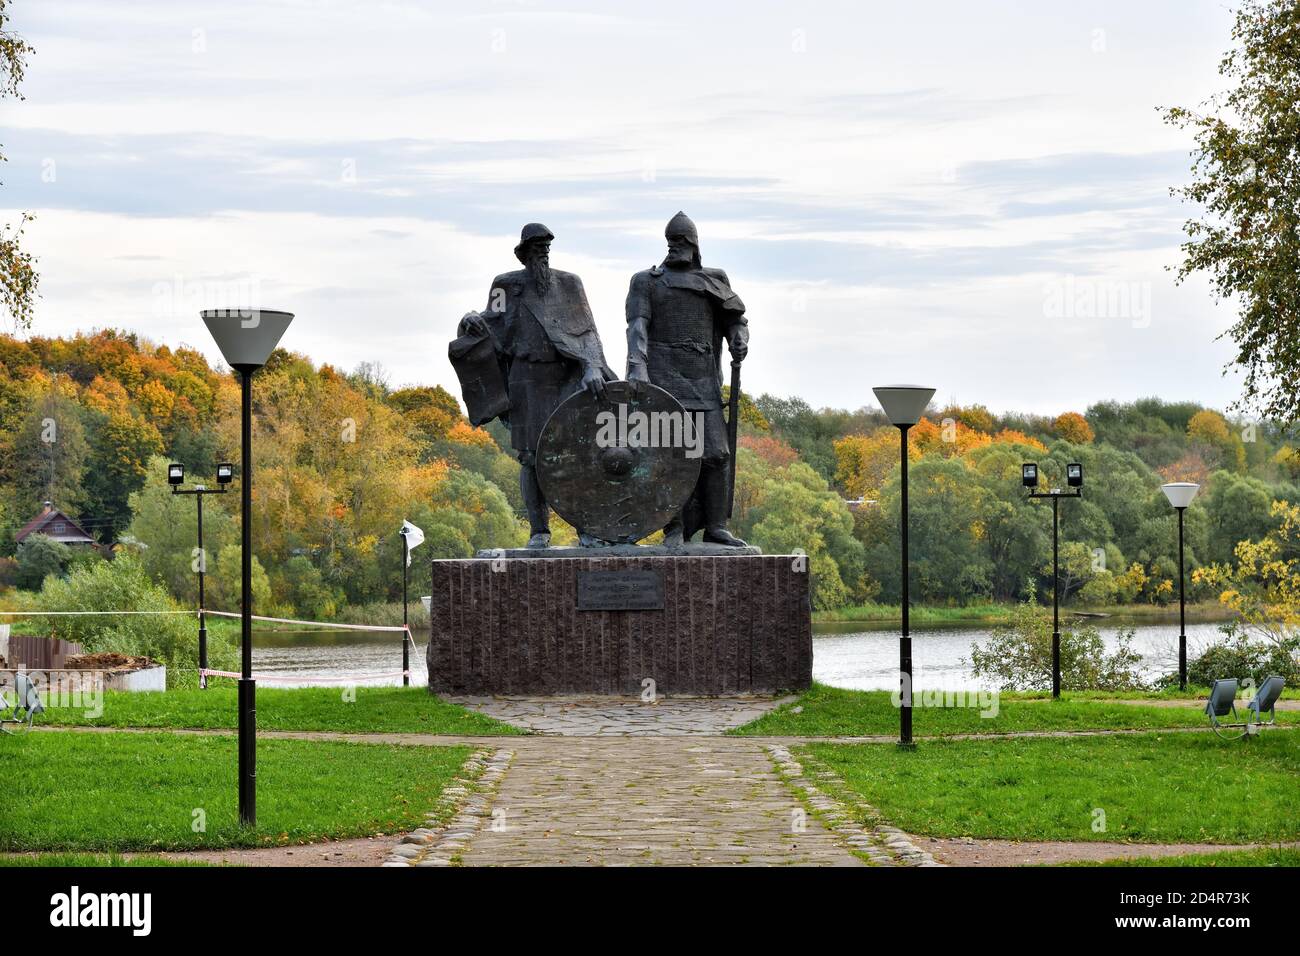 Staraya Ladoga, Russia - October 6, 2020: Monument to the two princes Rurik and Prophetic Oleg, founders of the Russian state. Established on Septembe Stock Photo